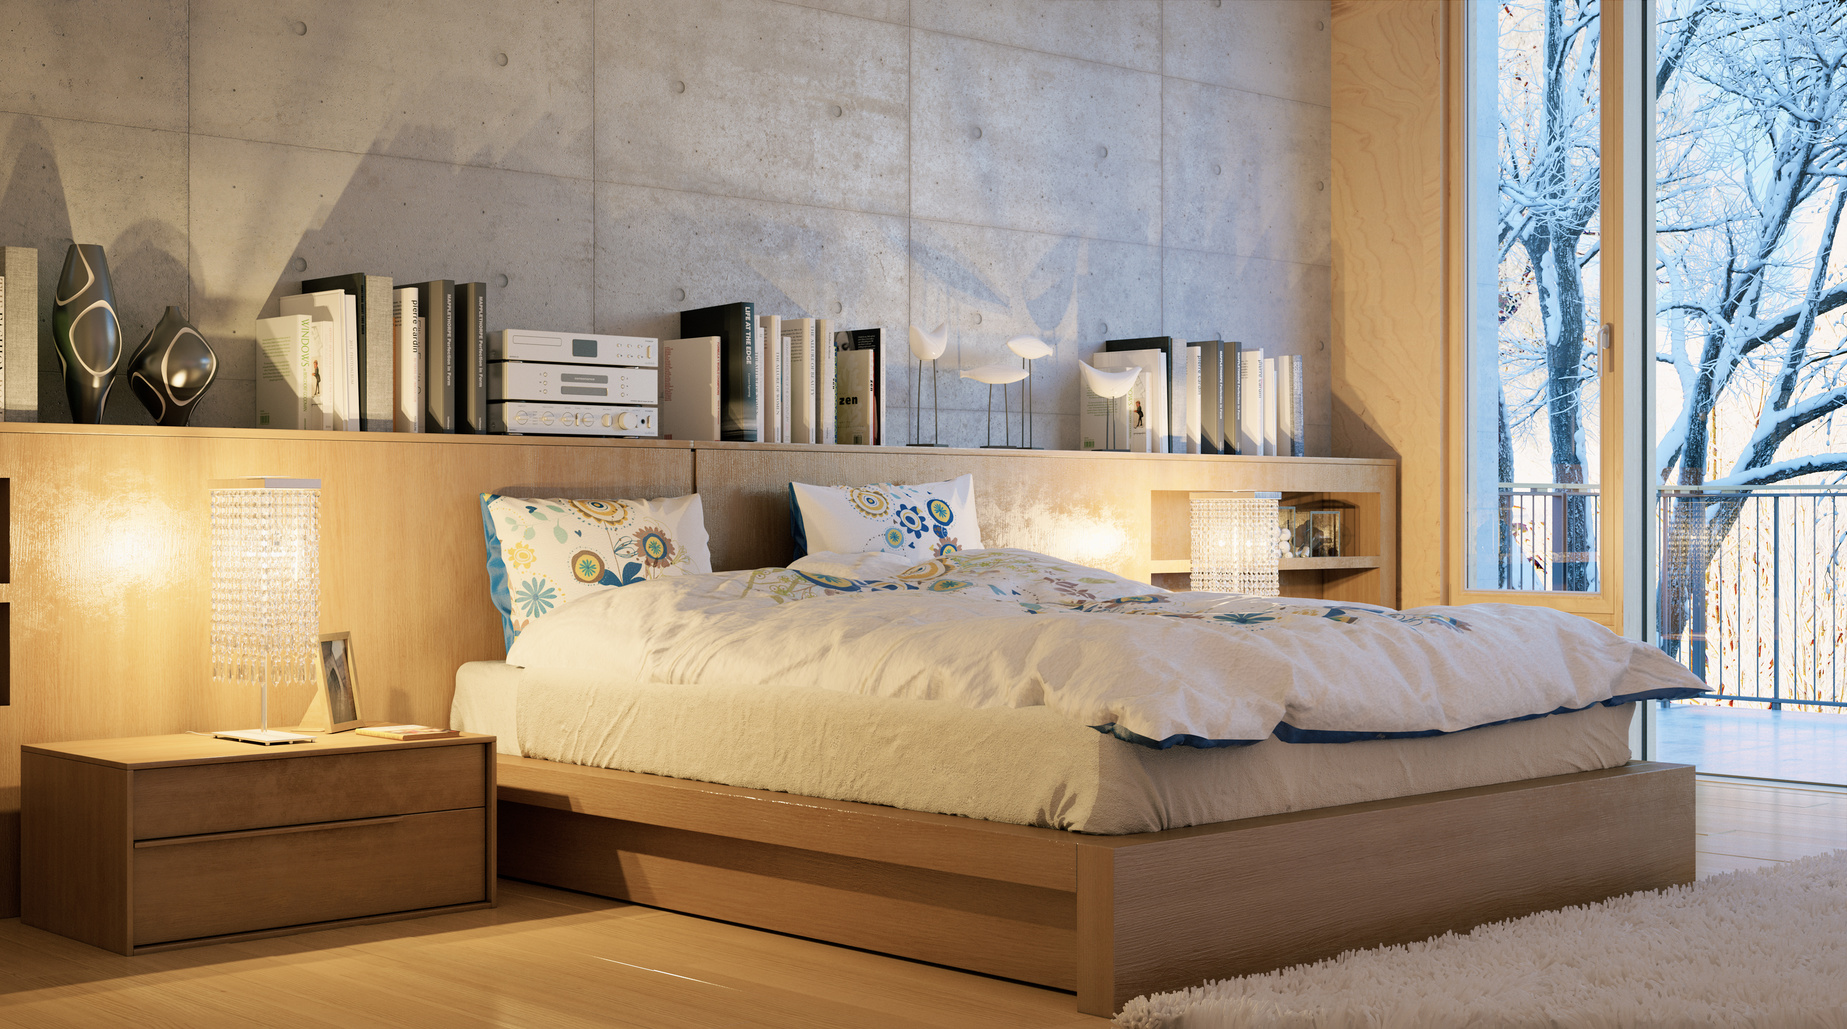 How To Furnish Small Bedrooms